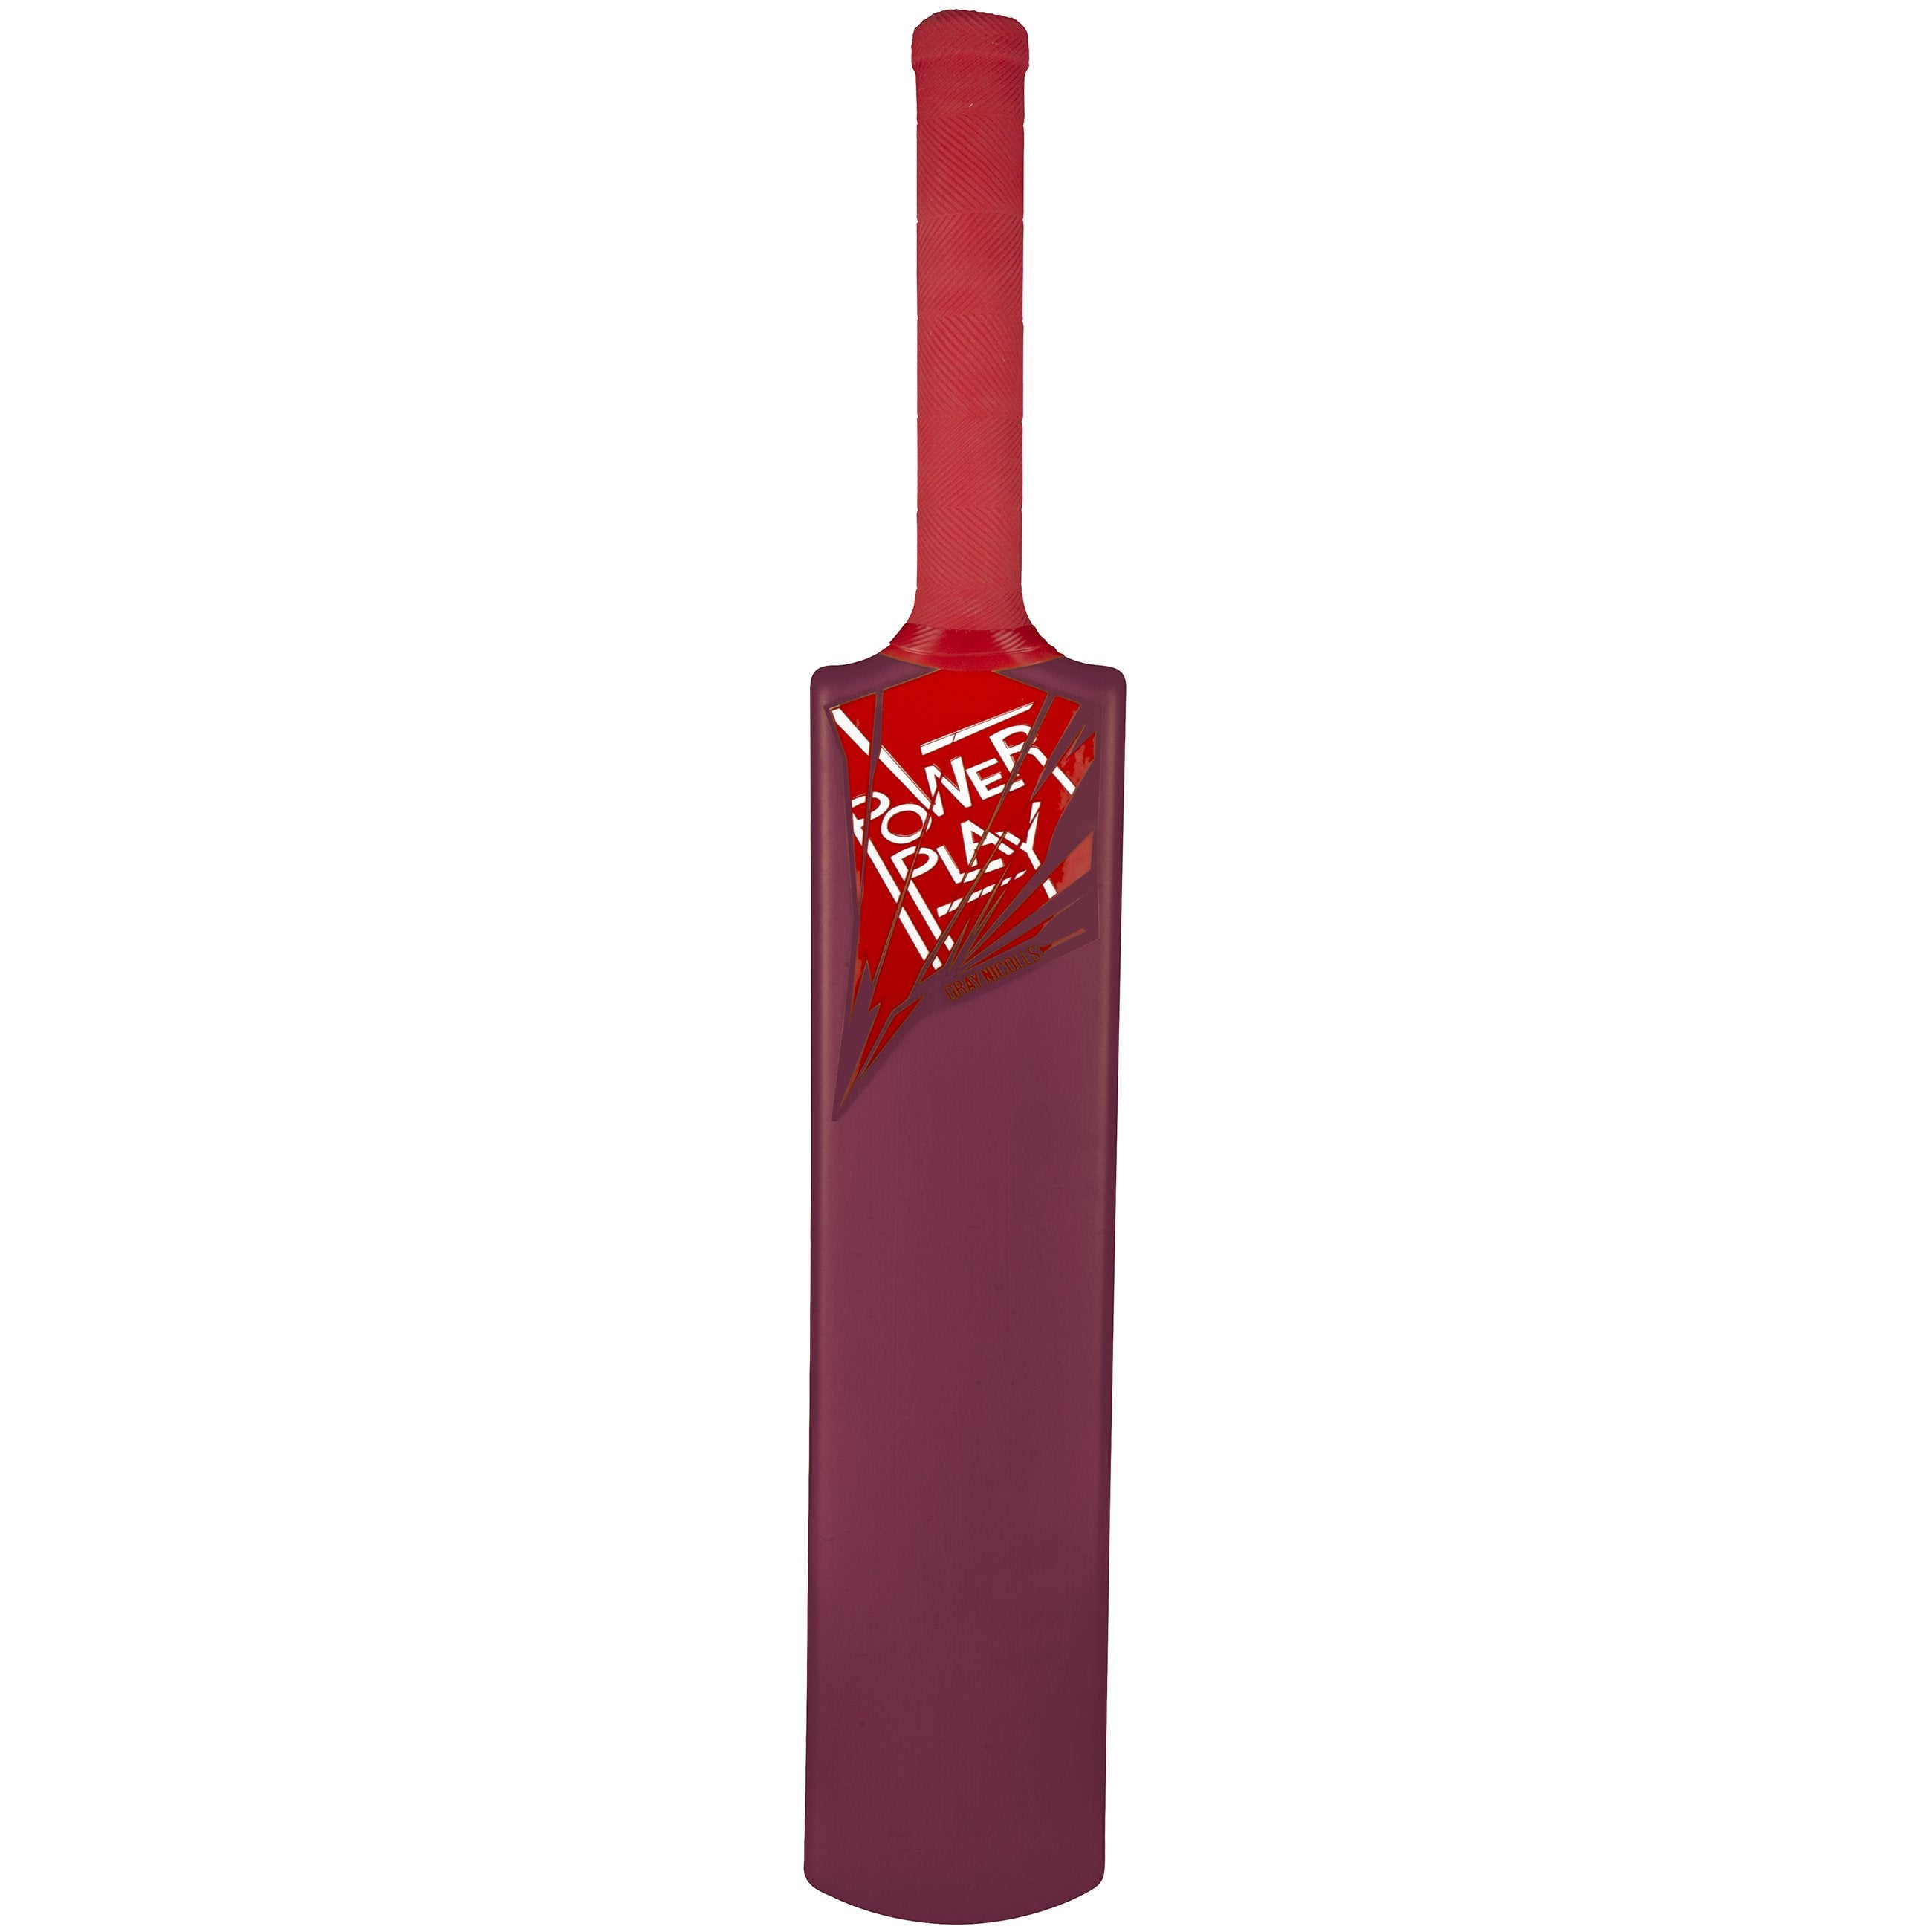 2600 CNBA20 5802554 Plastic Power Play Bat Maroon Size 0 Front